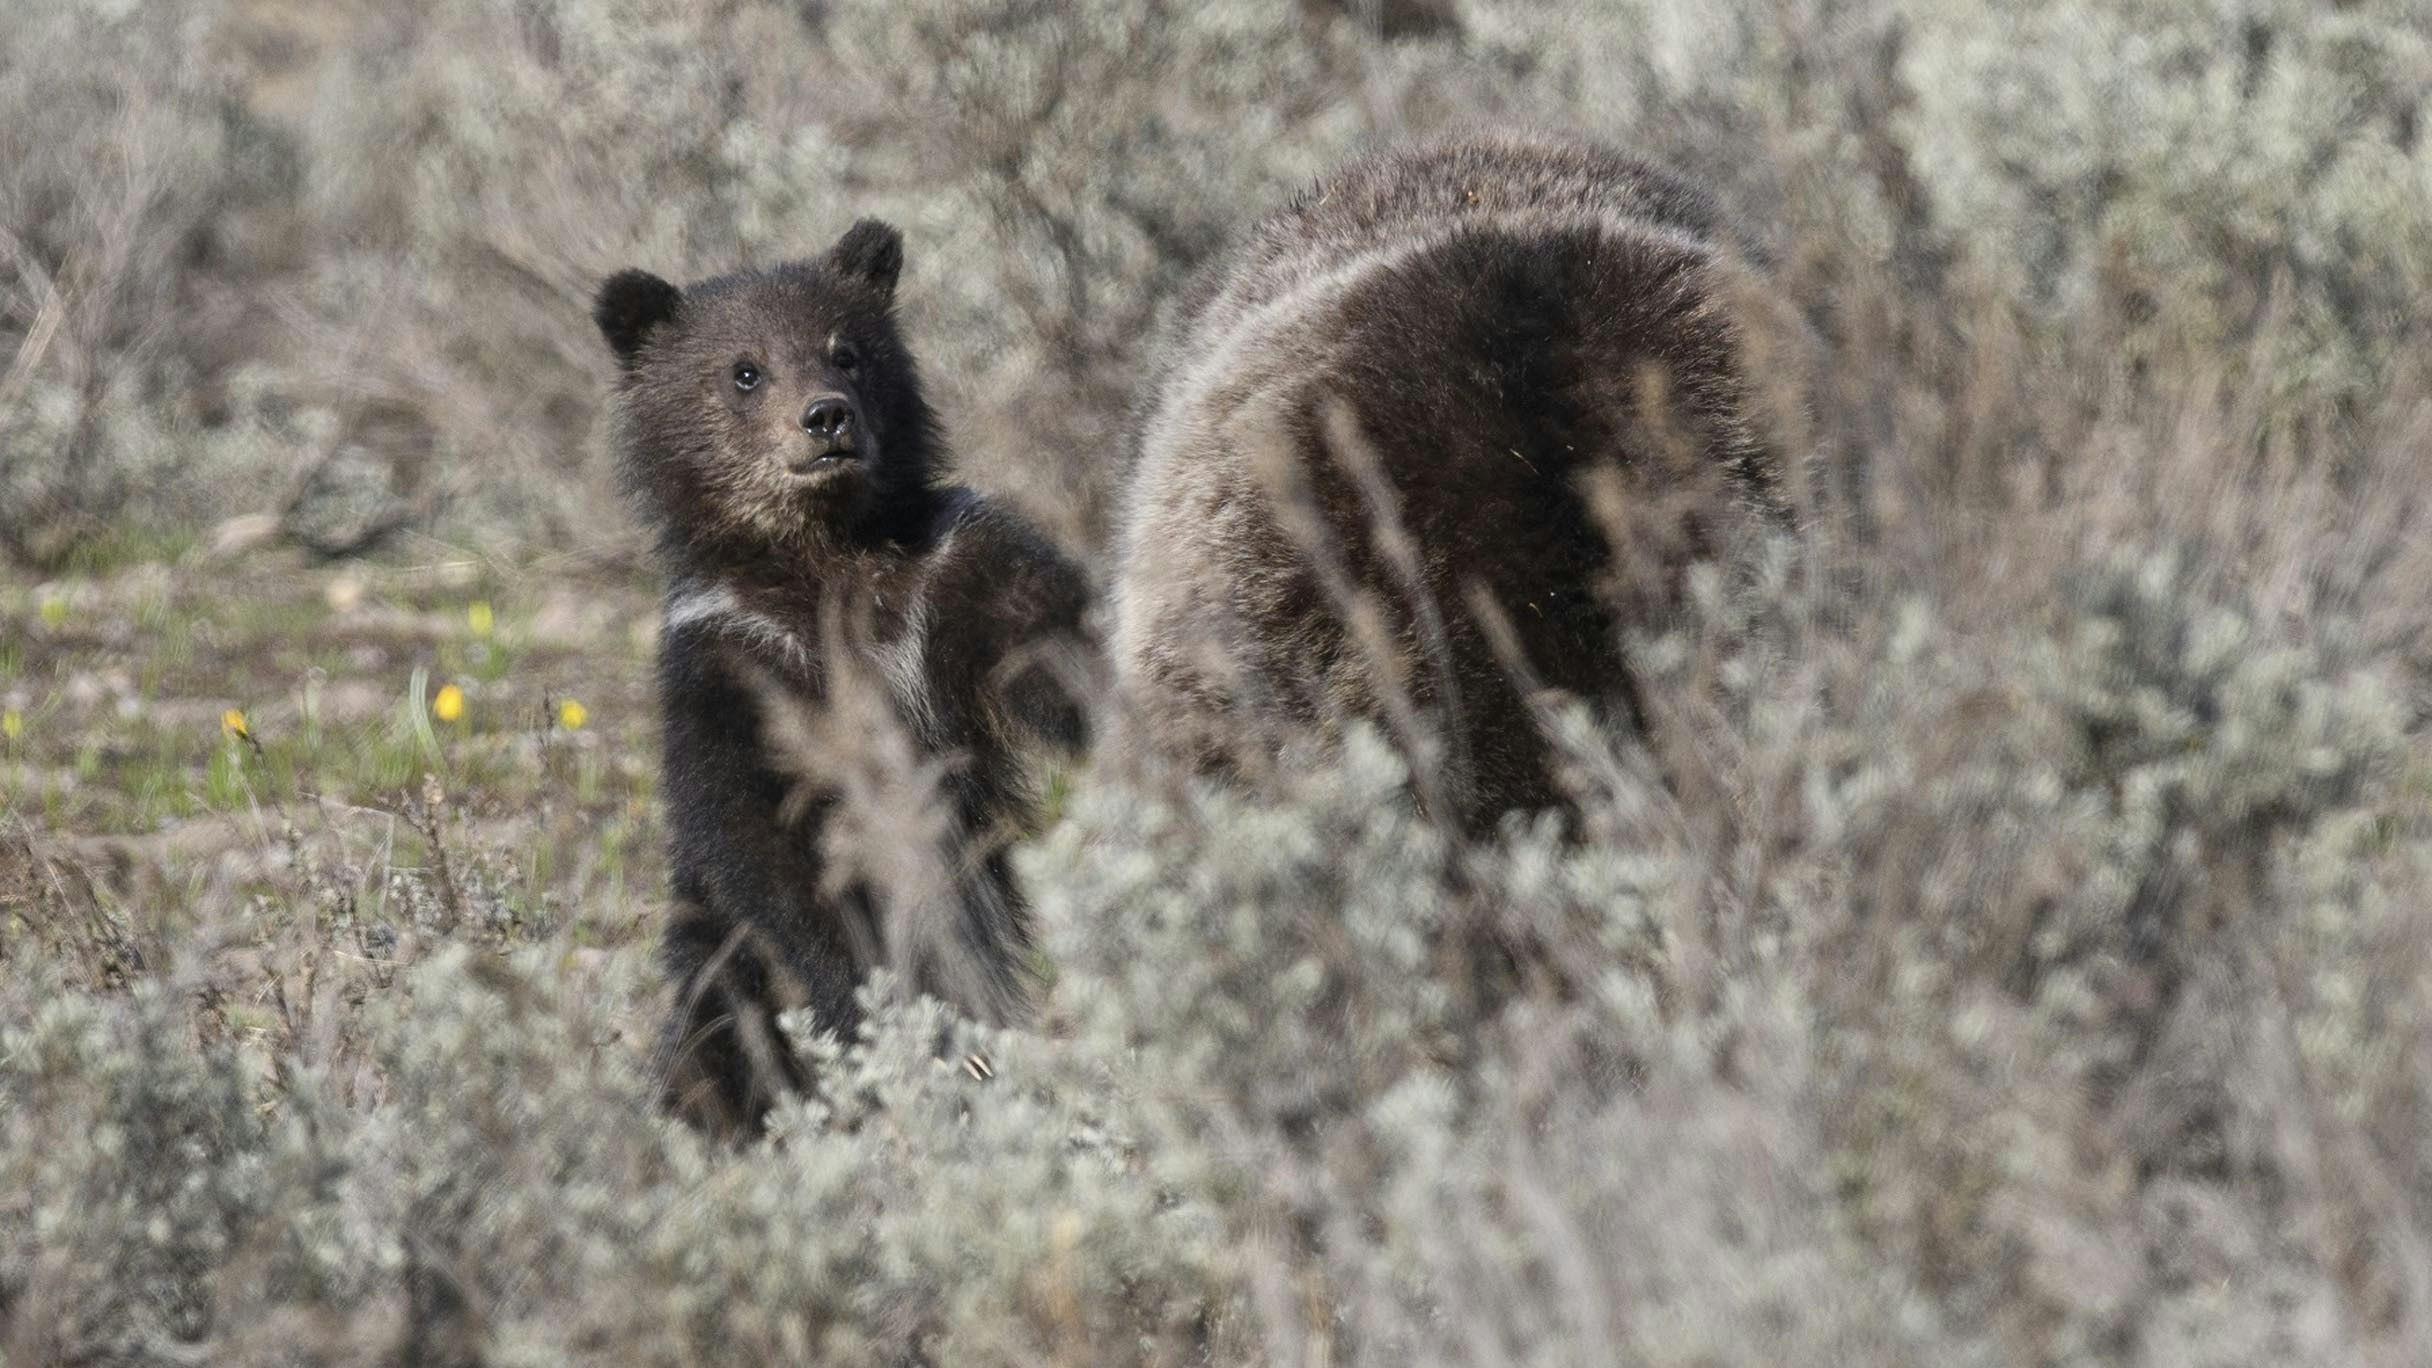 Grizzly 399's 2023 cub is seen exploring with his mother May 16. (Photo is owned by Jorn Vangoidtsenhoven and may not be reproduced)